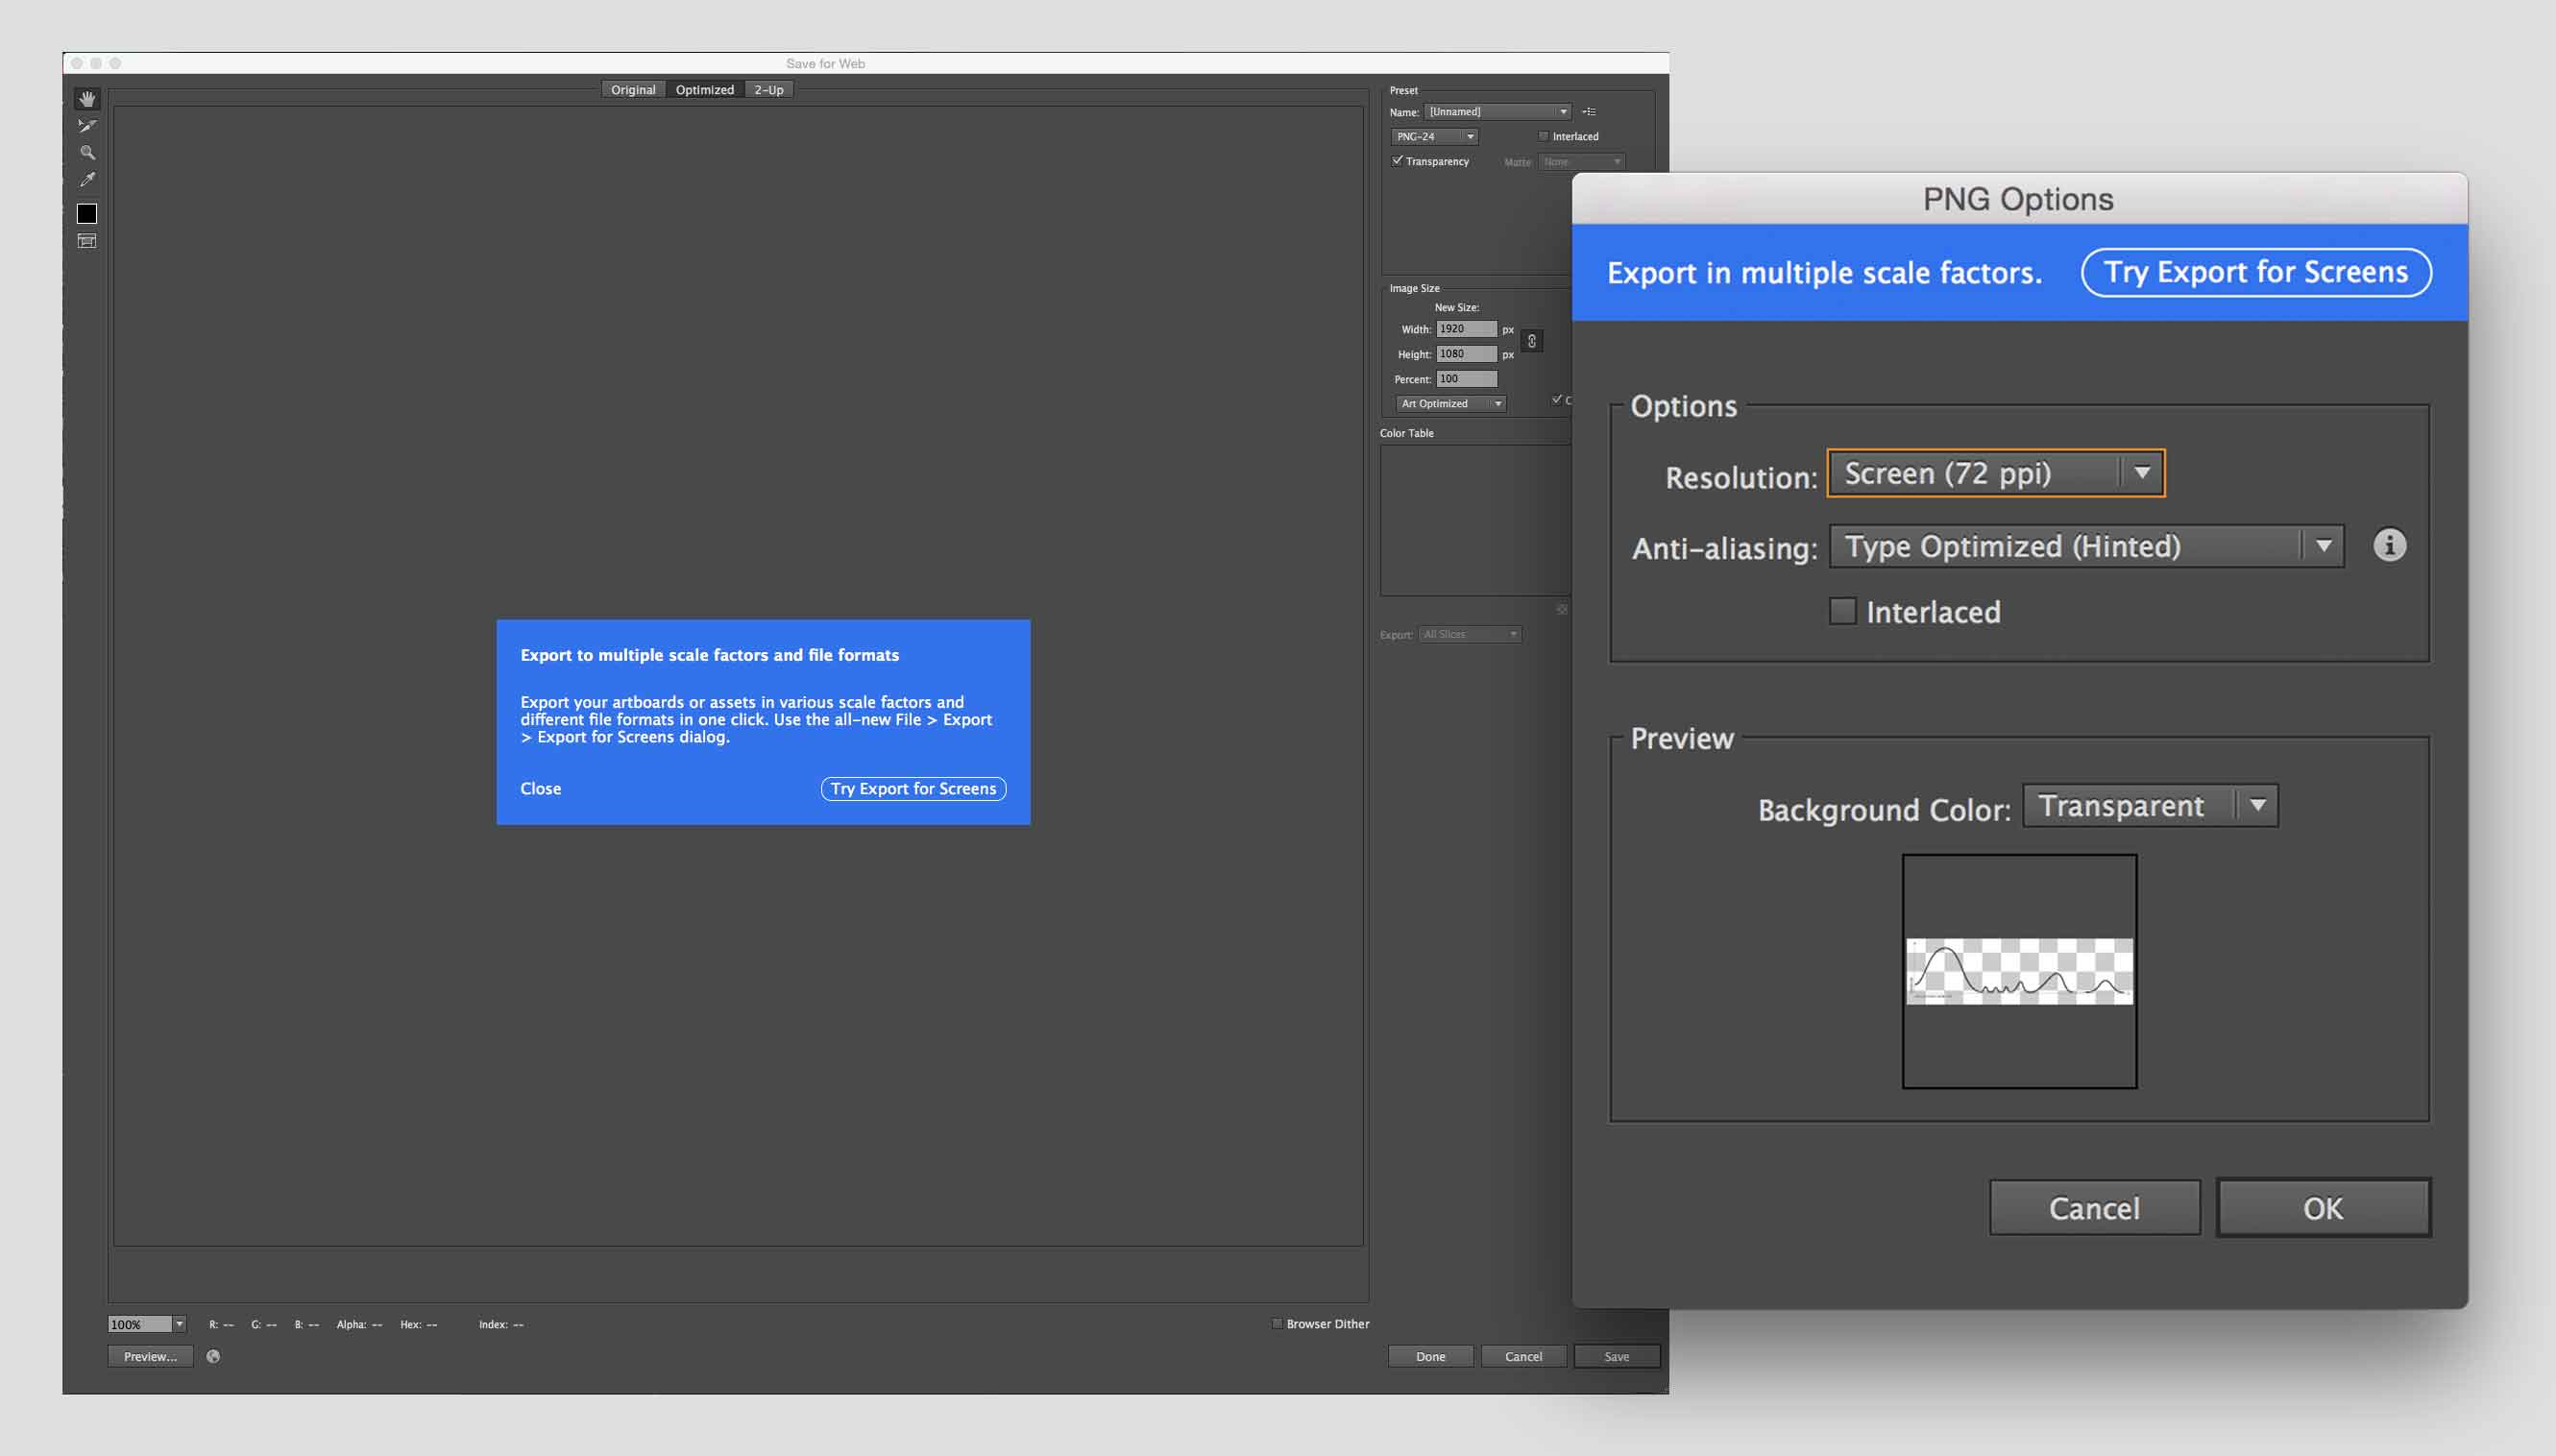 Screenshots showing "Save for screens" feature repeated in Photoshop and Illustrator